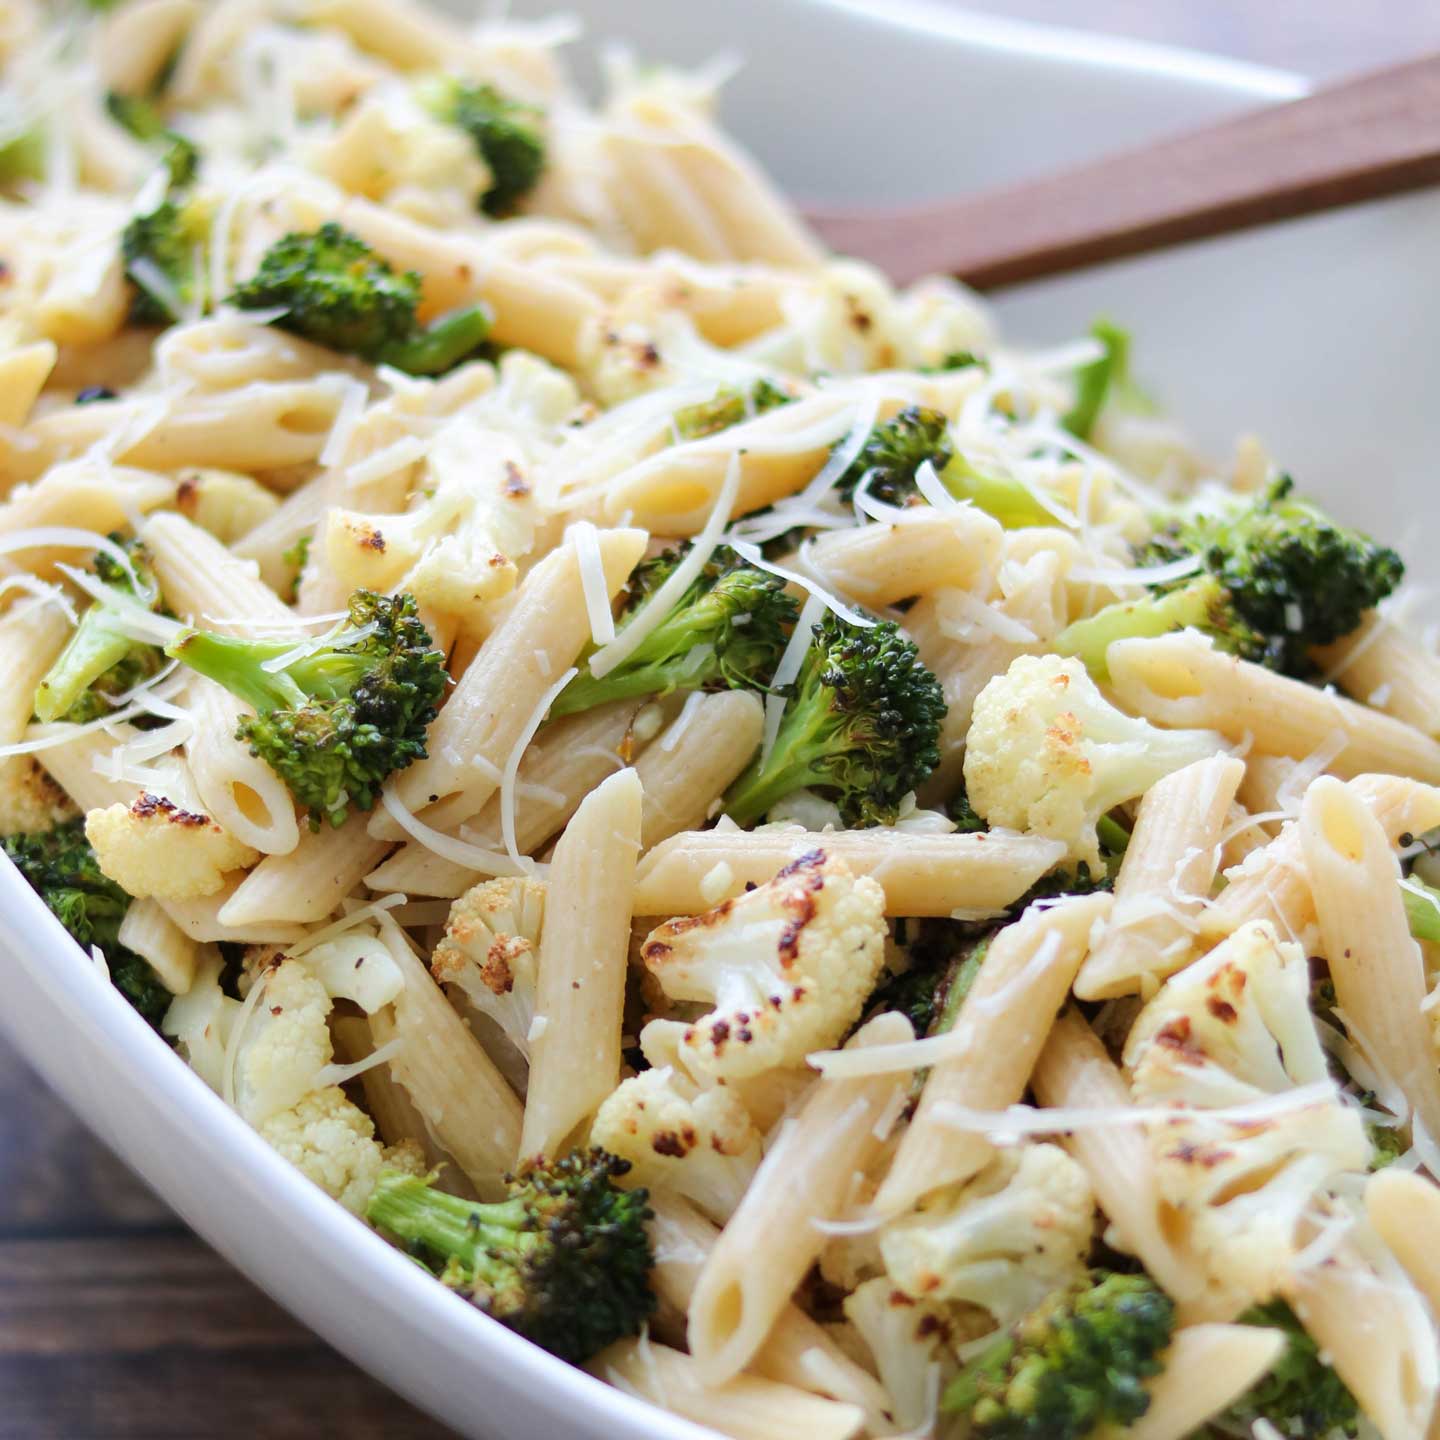 This simple roasted vegetable pasta recipe is both delicious and easy enough for busy weeknights! Plus, it’s loaded with whole grains and oodles of veggies! A total win!